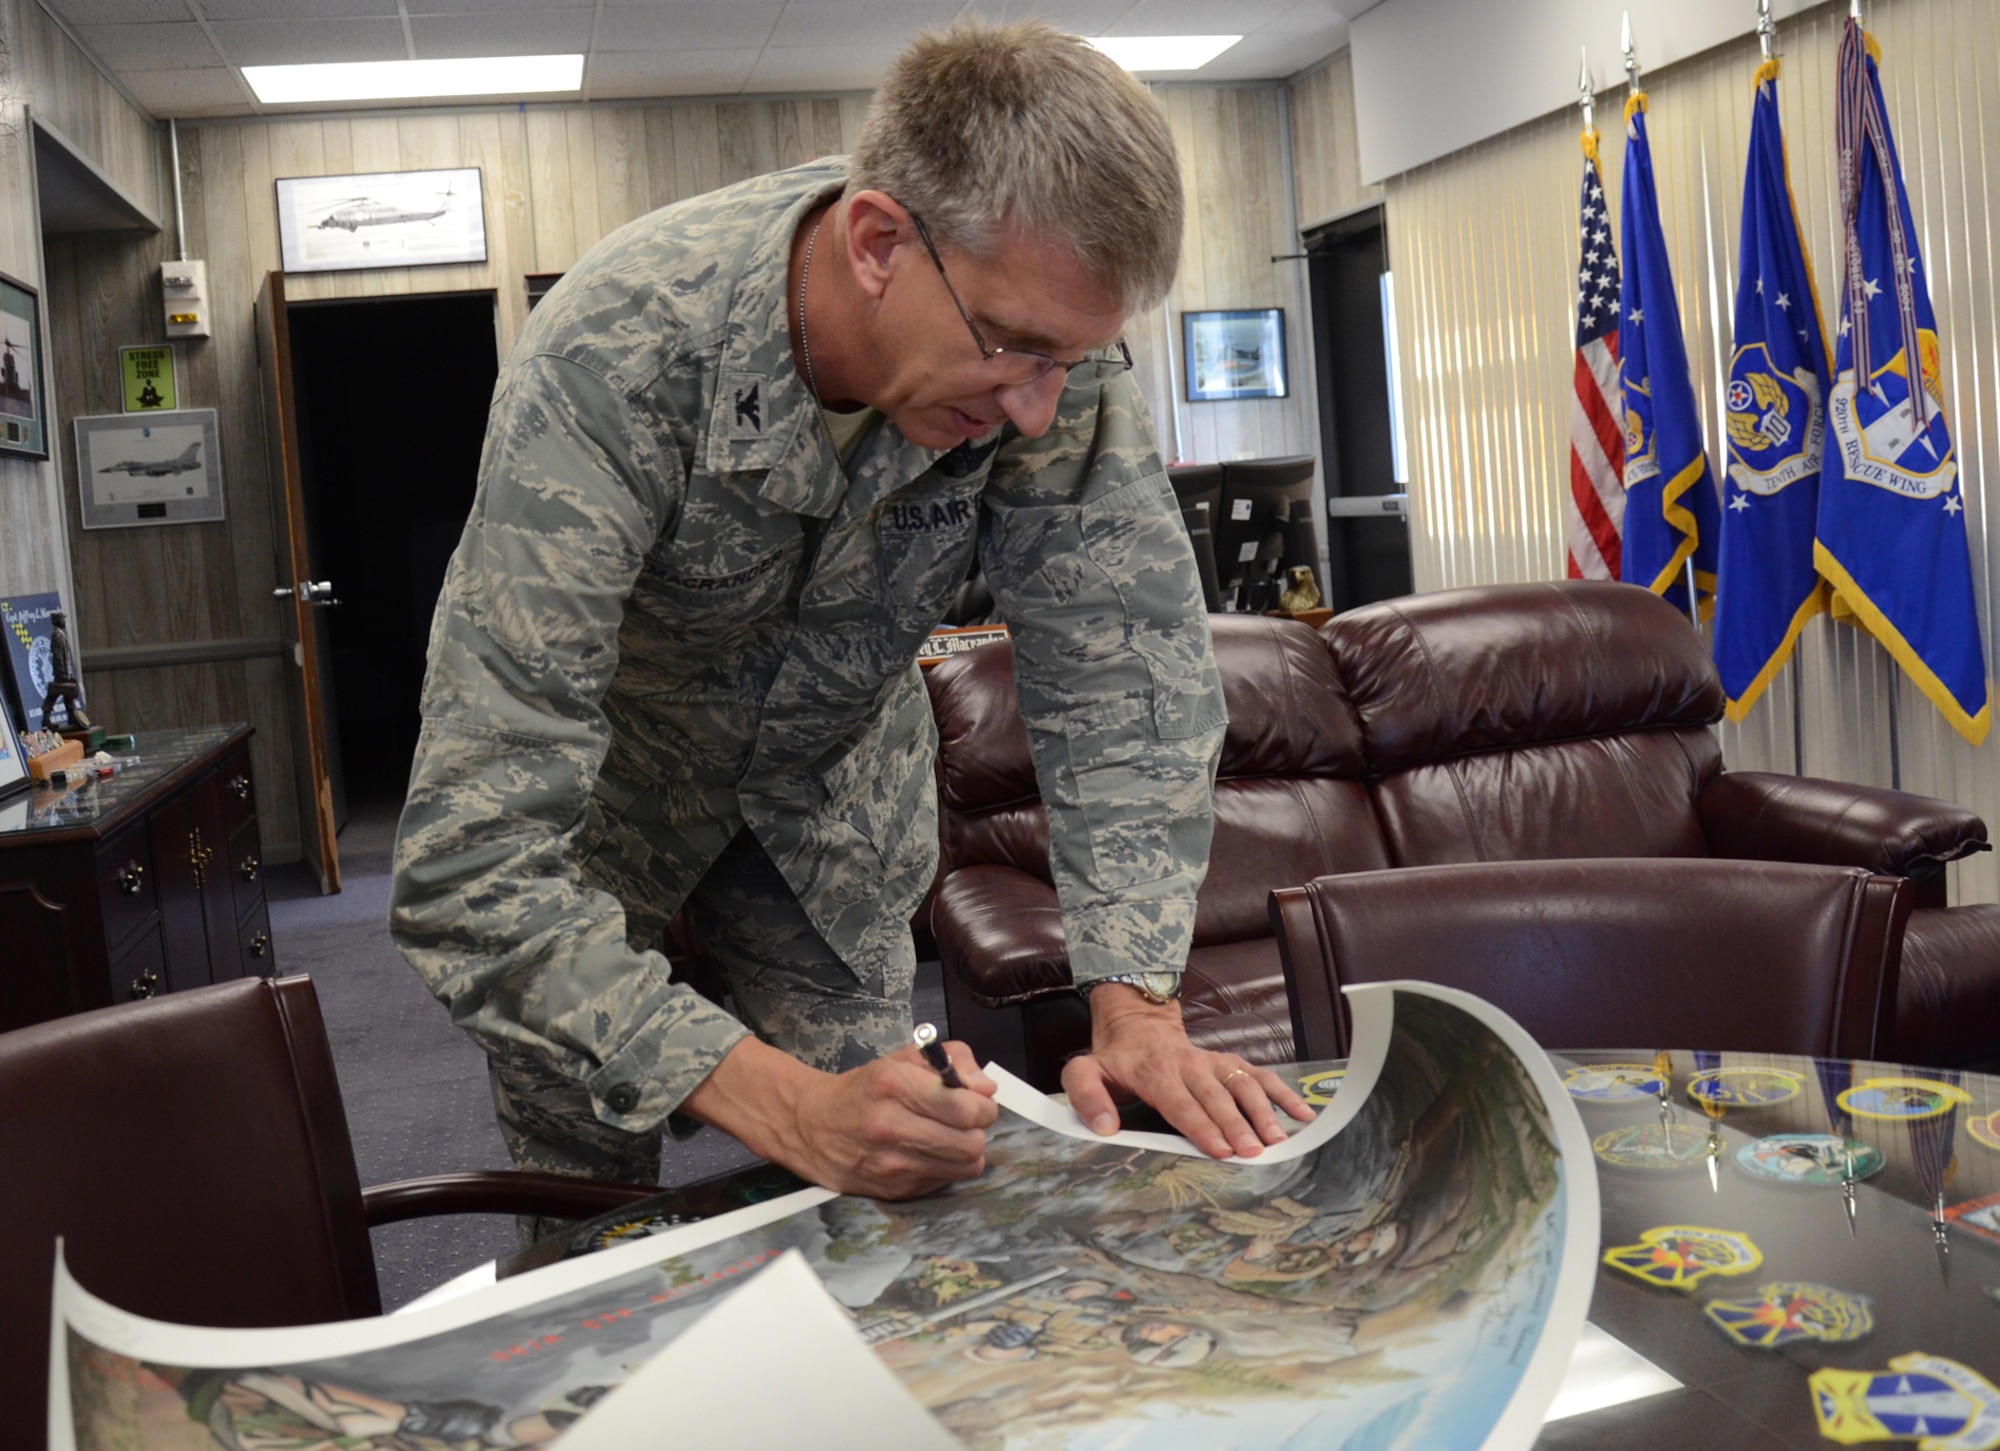 Col. Jeffrey Macrander signs an artist's rendition of Operation Redwing. The image shows four Navy SEALs who initiated the operaton engaged in a firefight by Jason Nicholson 2011. Macrander and fellow rescuers from the 920th Rescue Wing were part of the rescue mission that brought Navy SEAL Marcus Luttrell, the lone survivor of the operaton, home. (U.S. Air Force photo/Master Sgt. Paul Flipse)